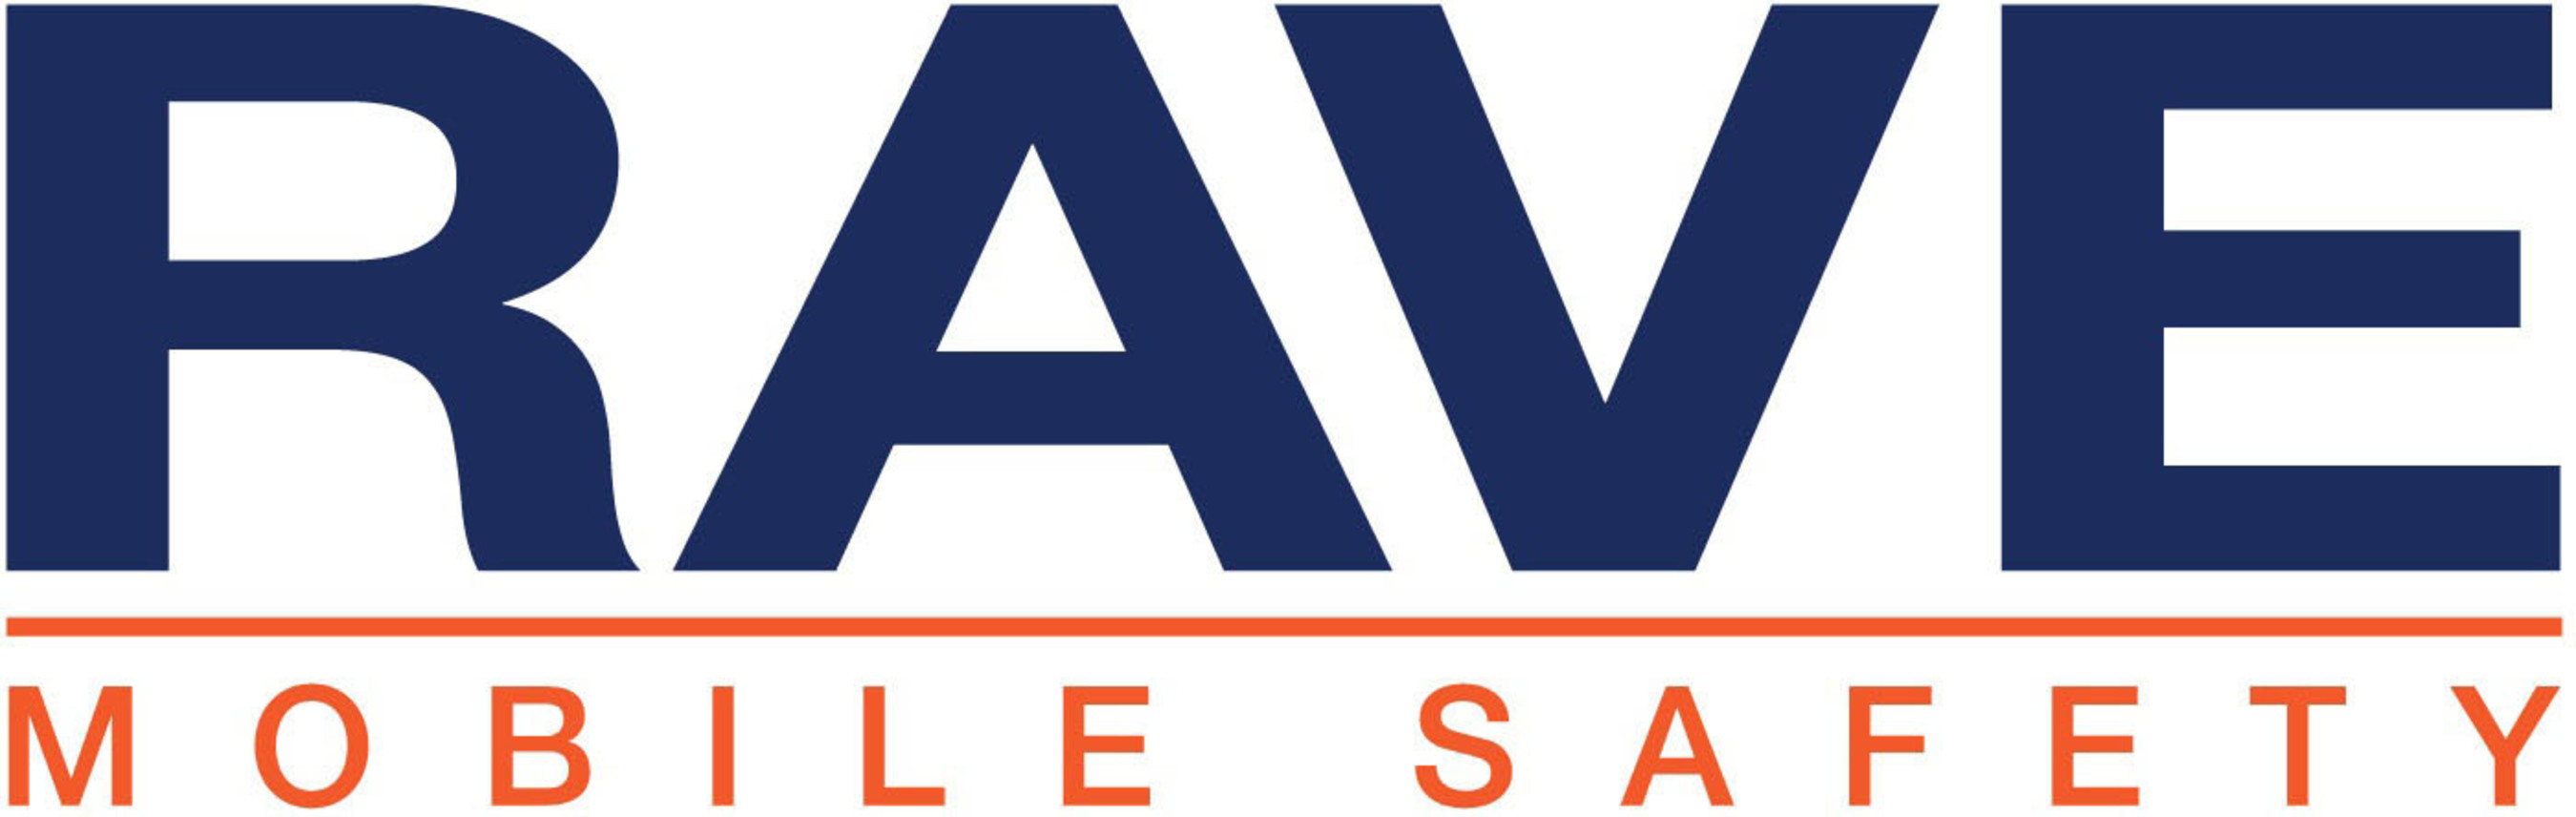 Rave Mobile Safety, the trusted software partner for campus and public safety.